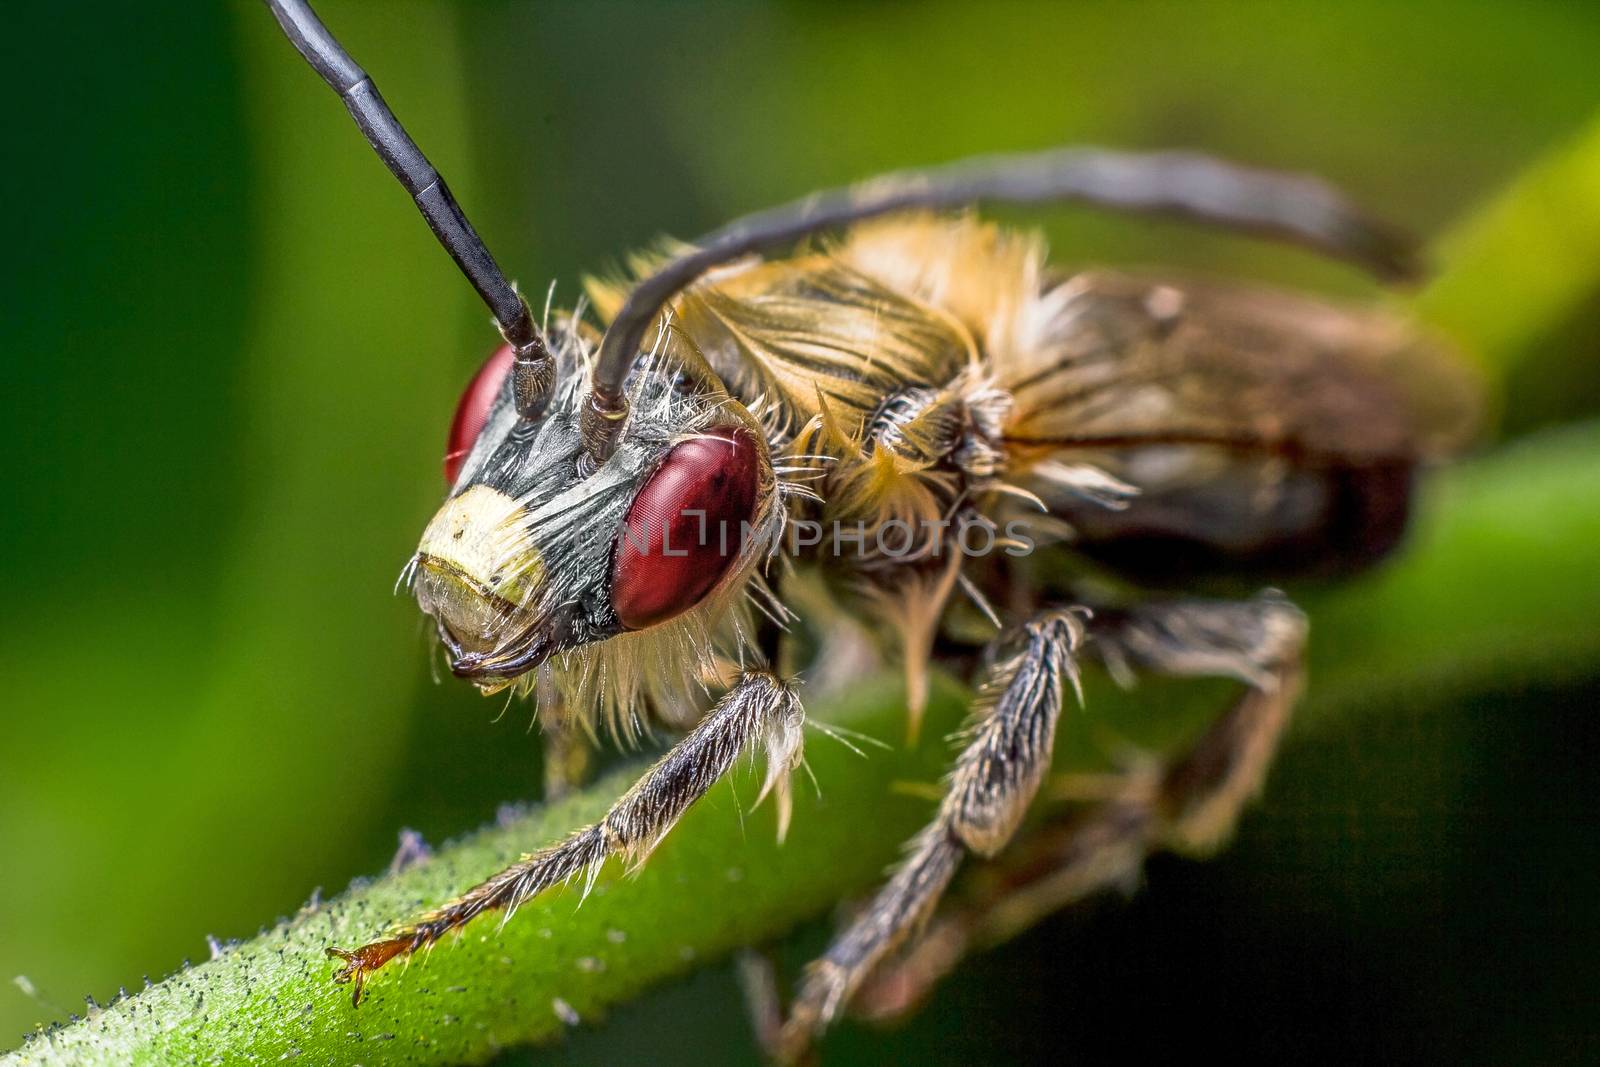 High magnification of a beautiful insect on a branch